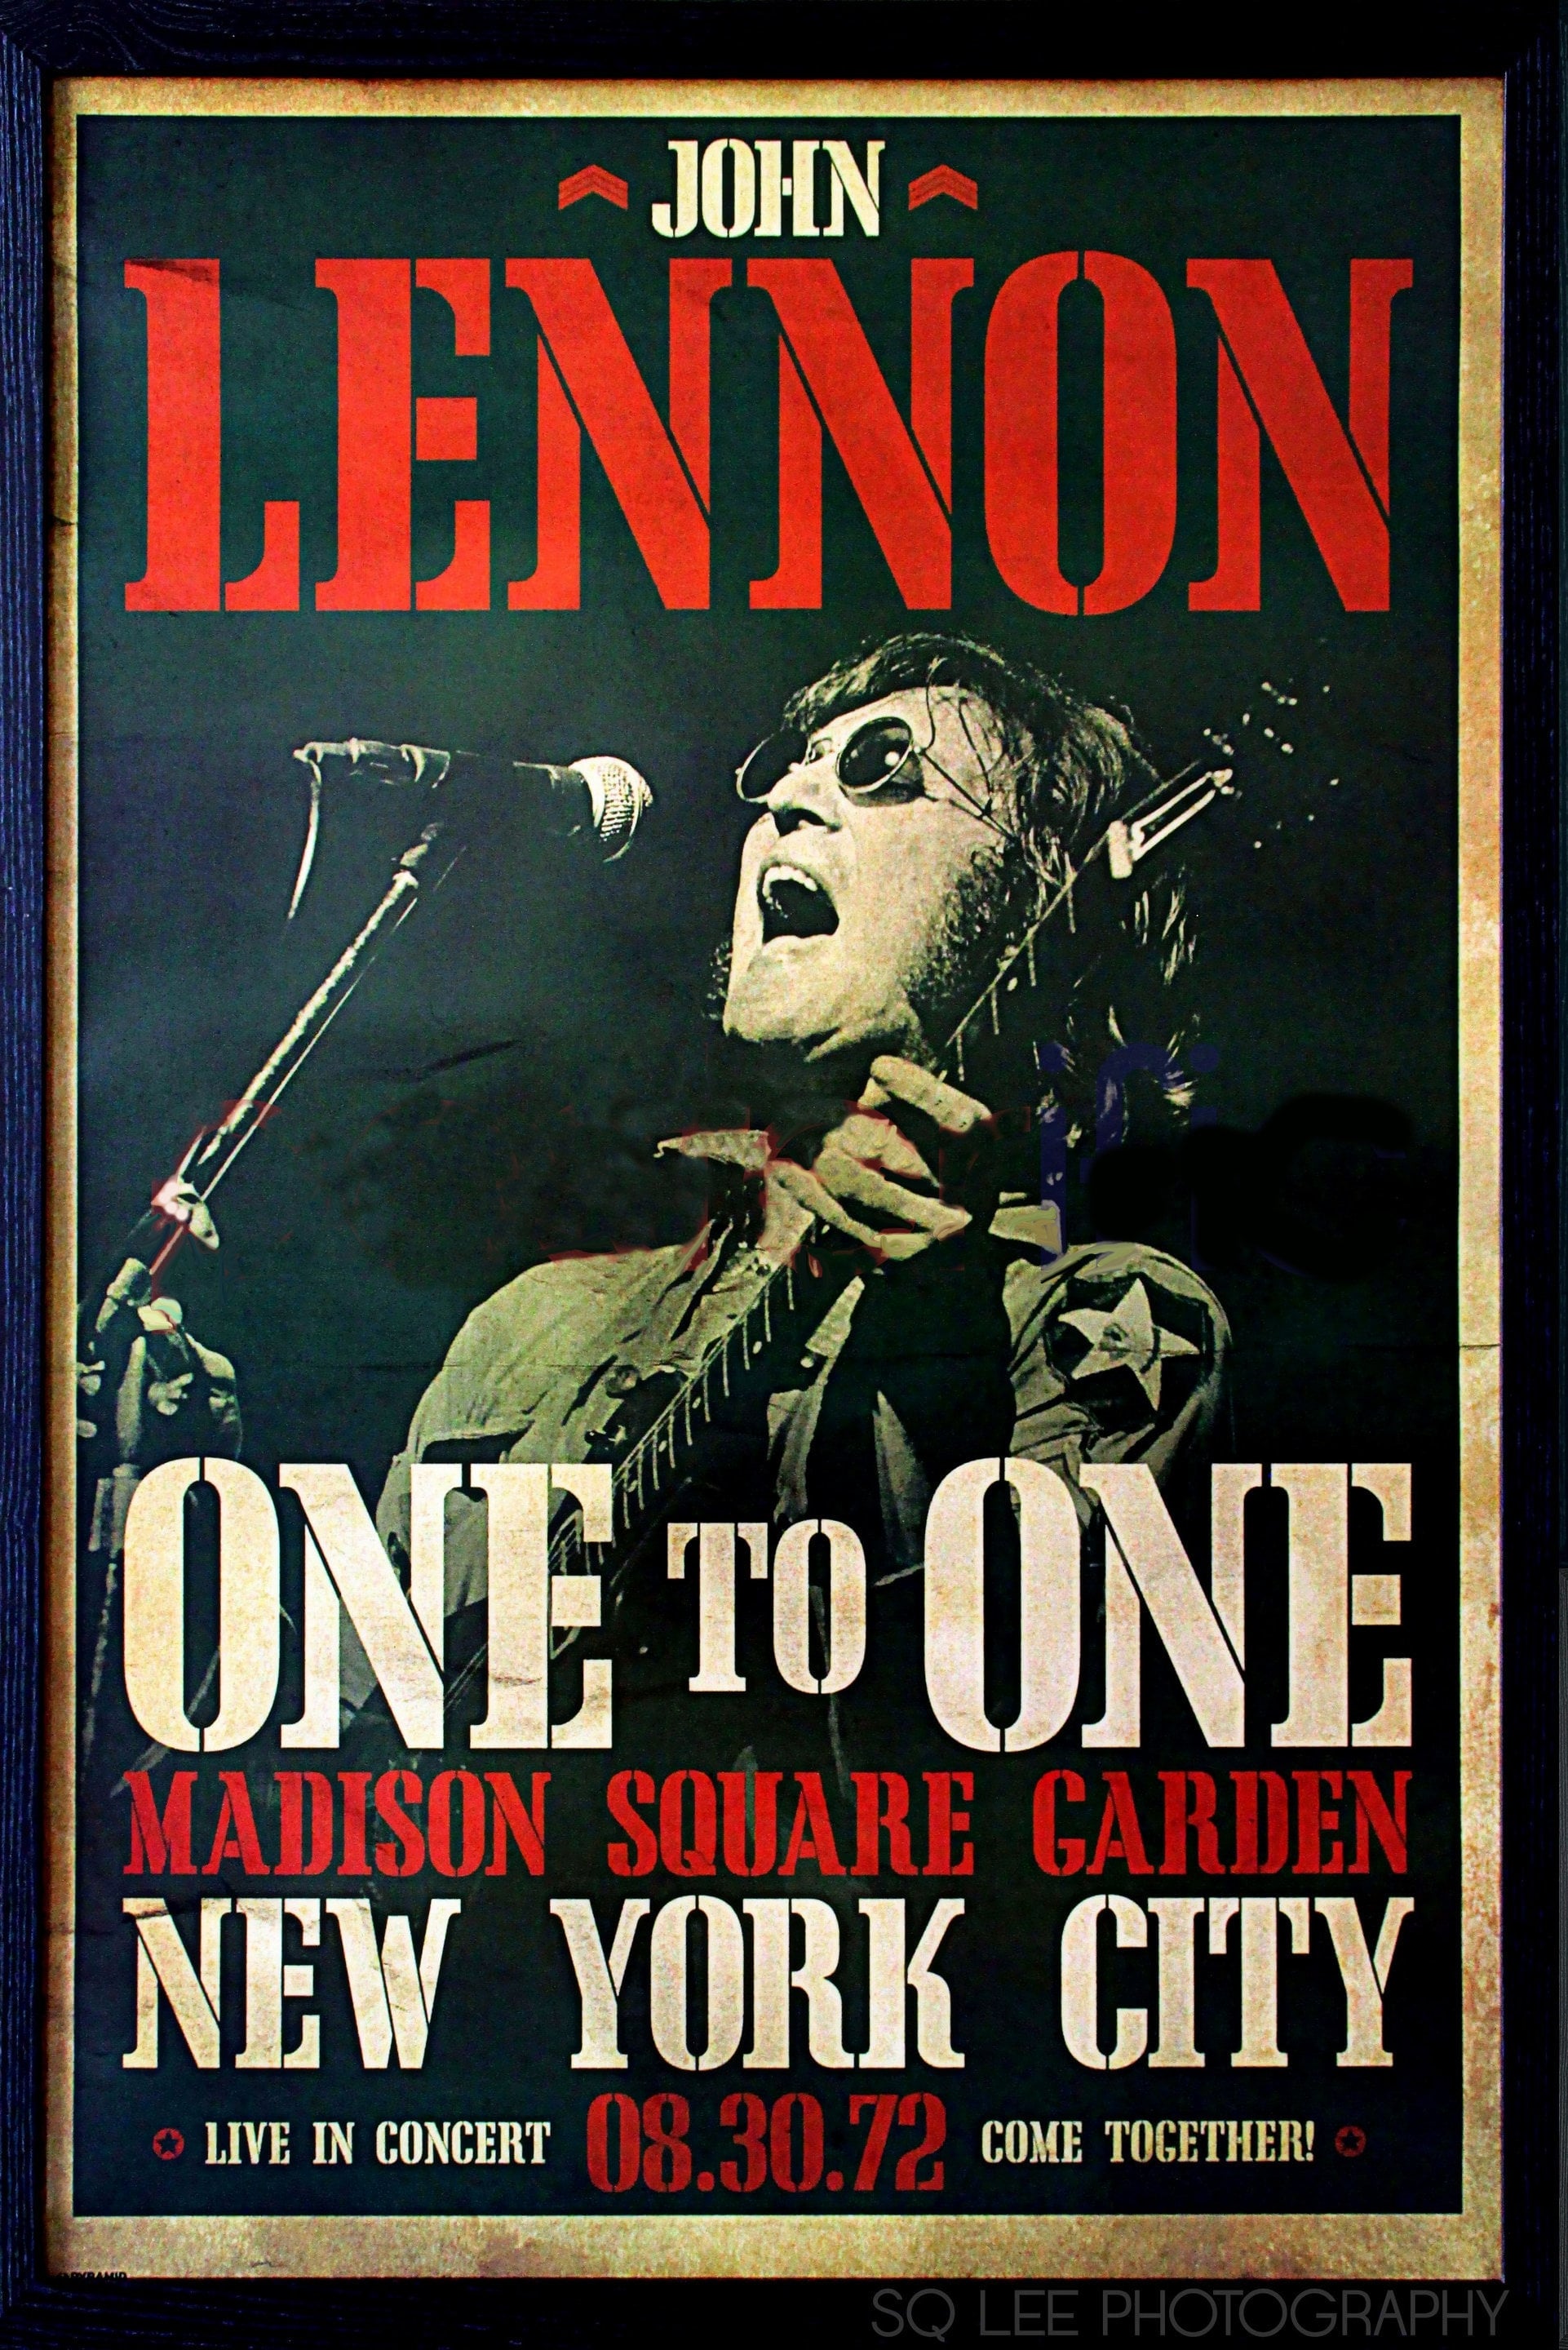 The One to One Concert